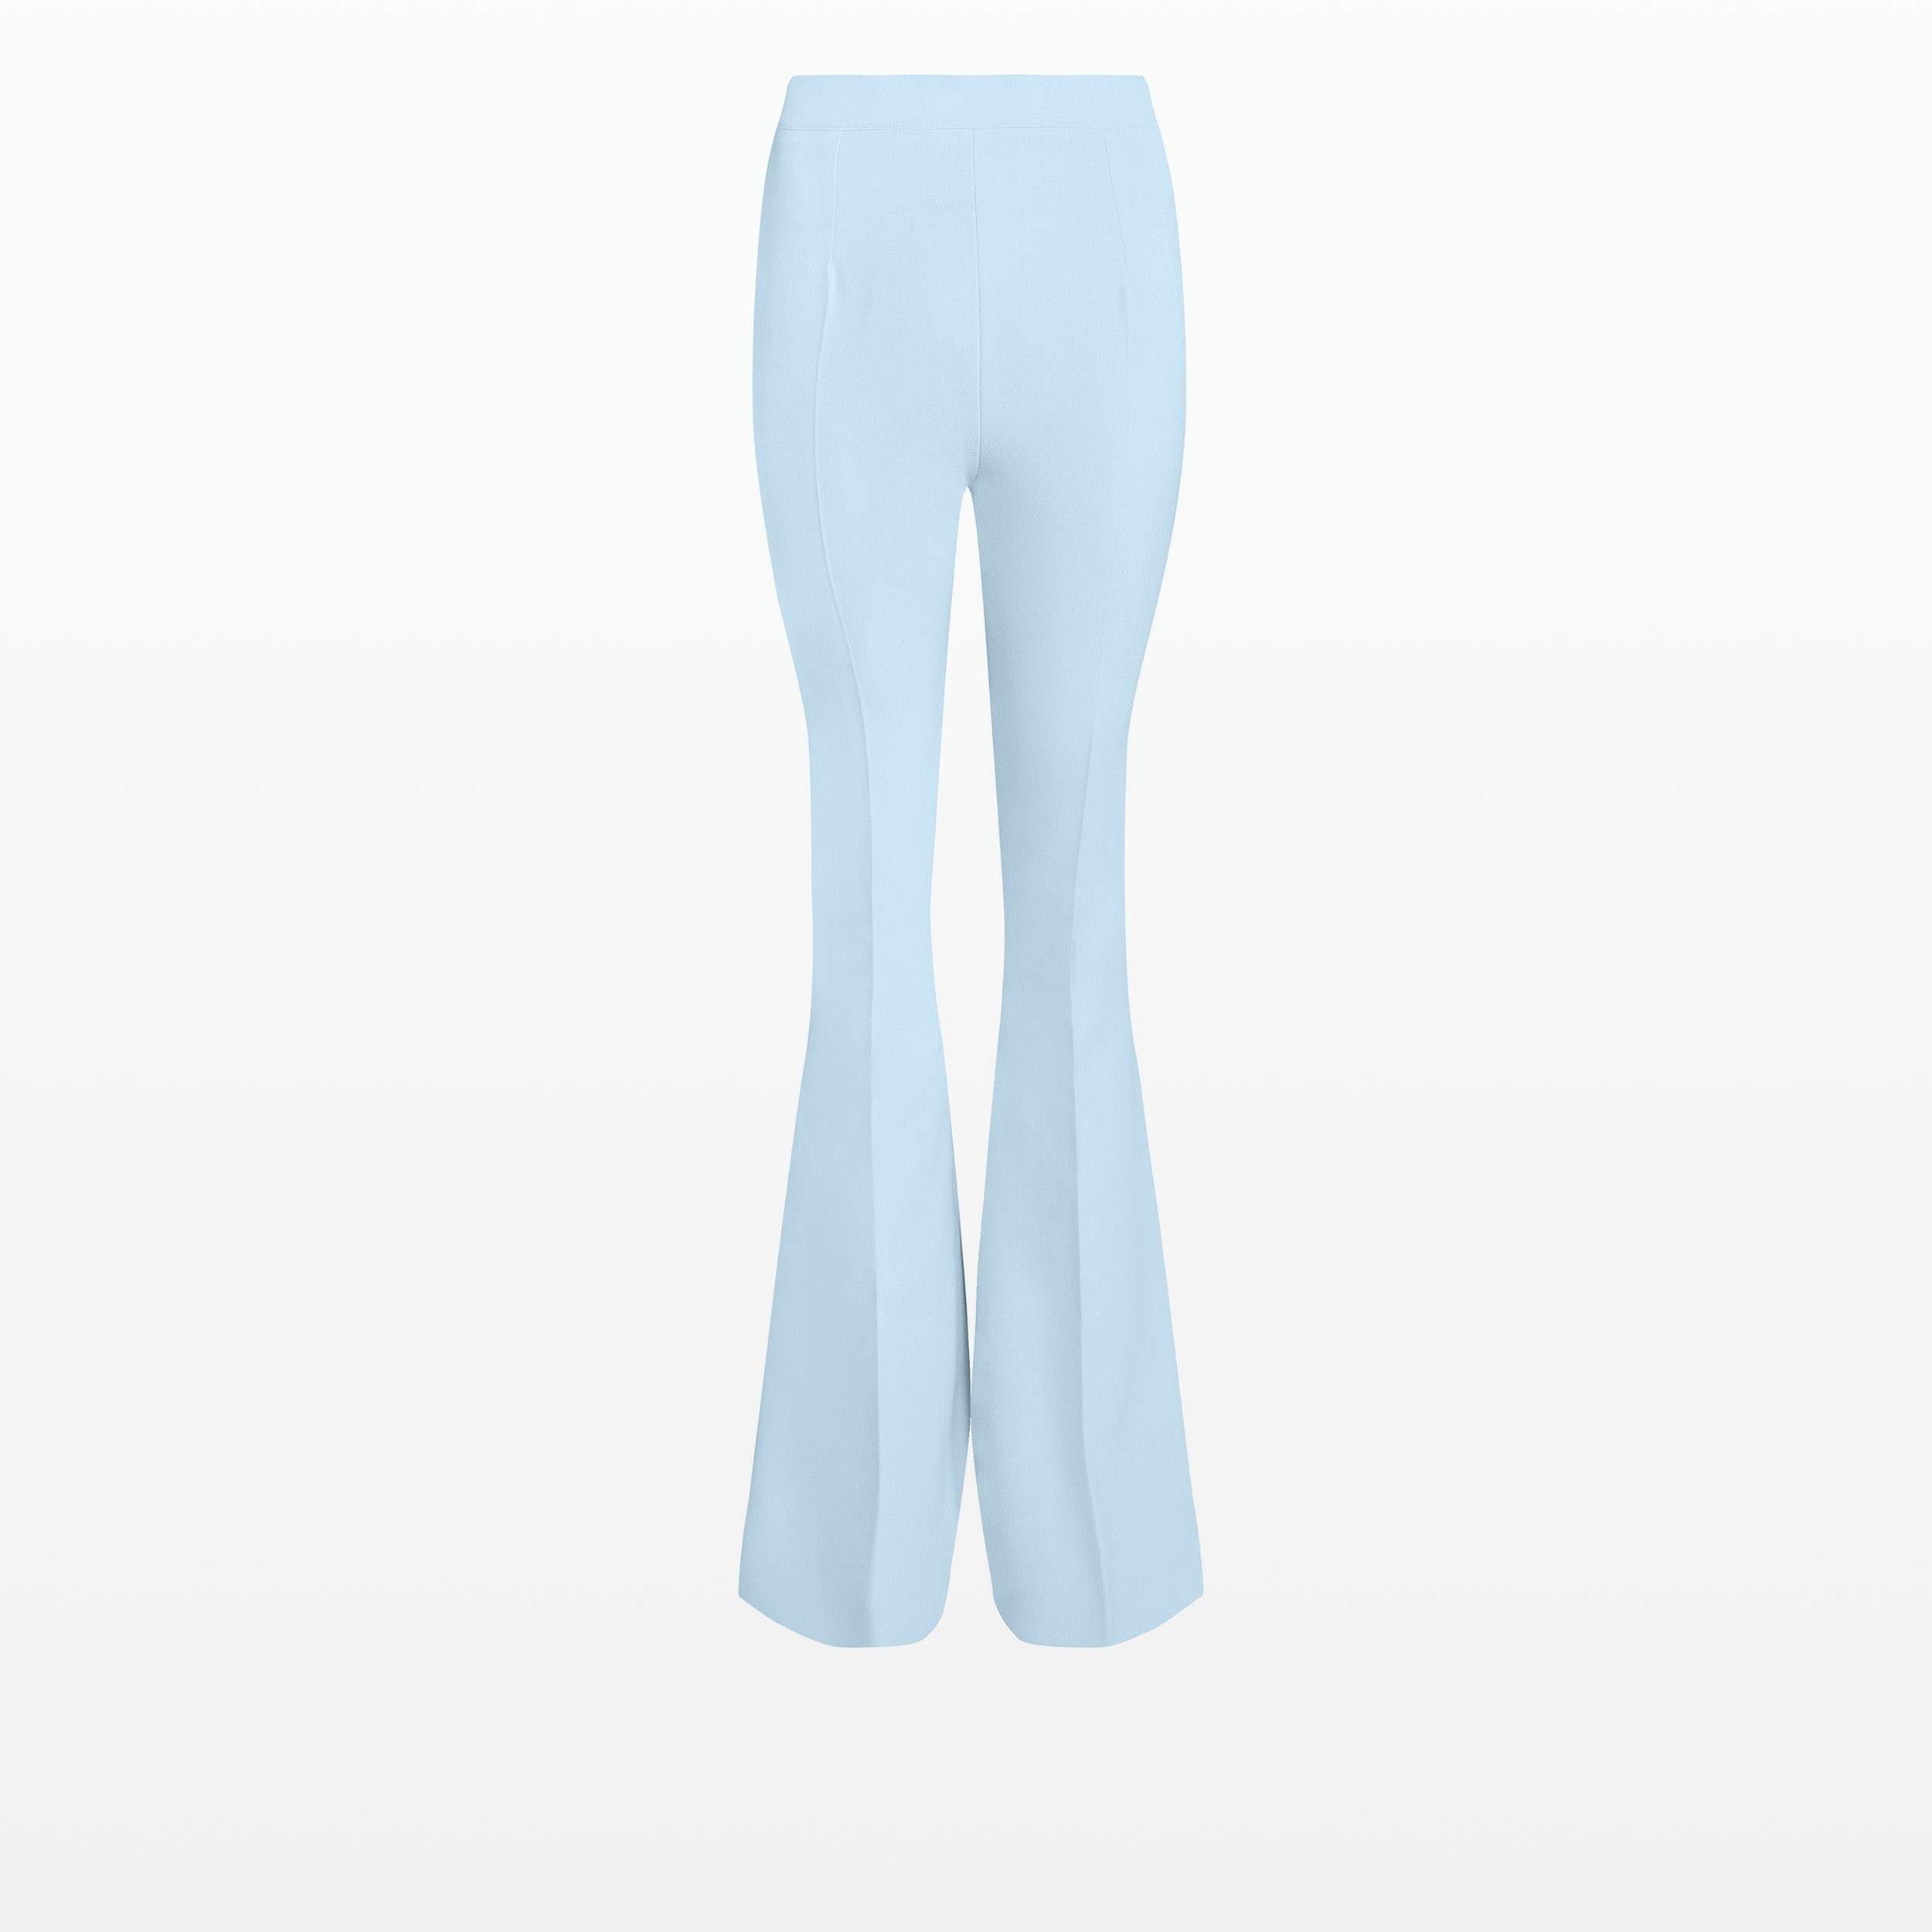 CaComMARK PI Women's Pants Clearance Women's Slim Fitting Casual Solid  Color Trousers Light Blue - Walmart.com